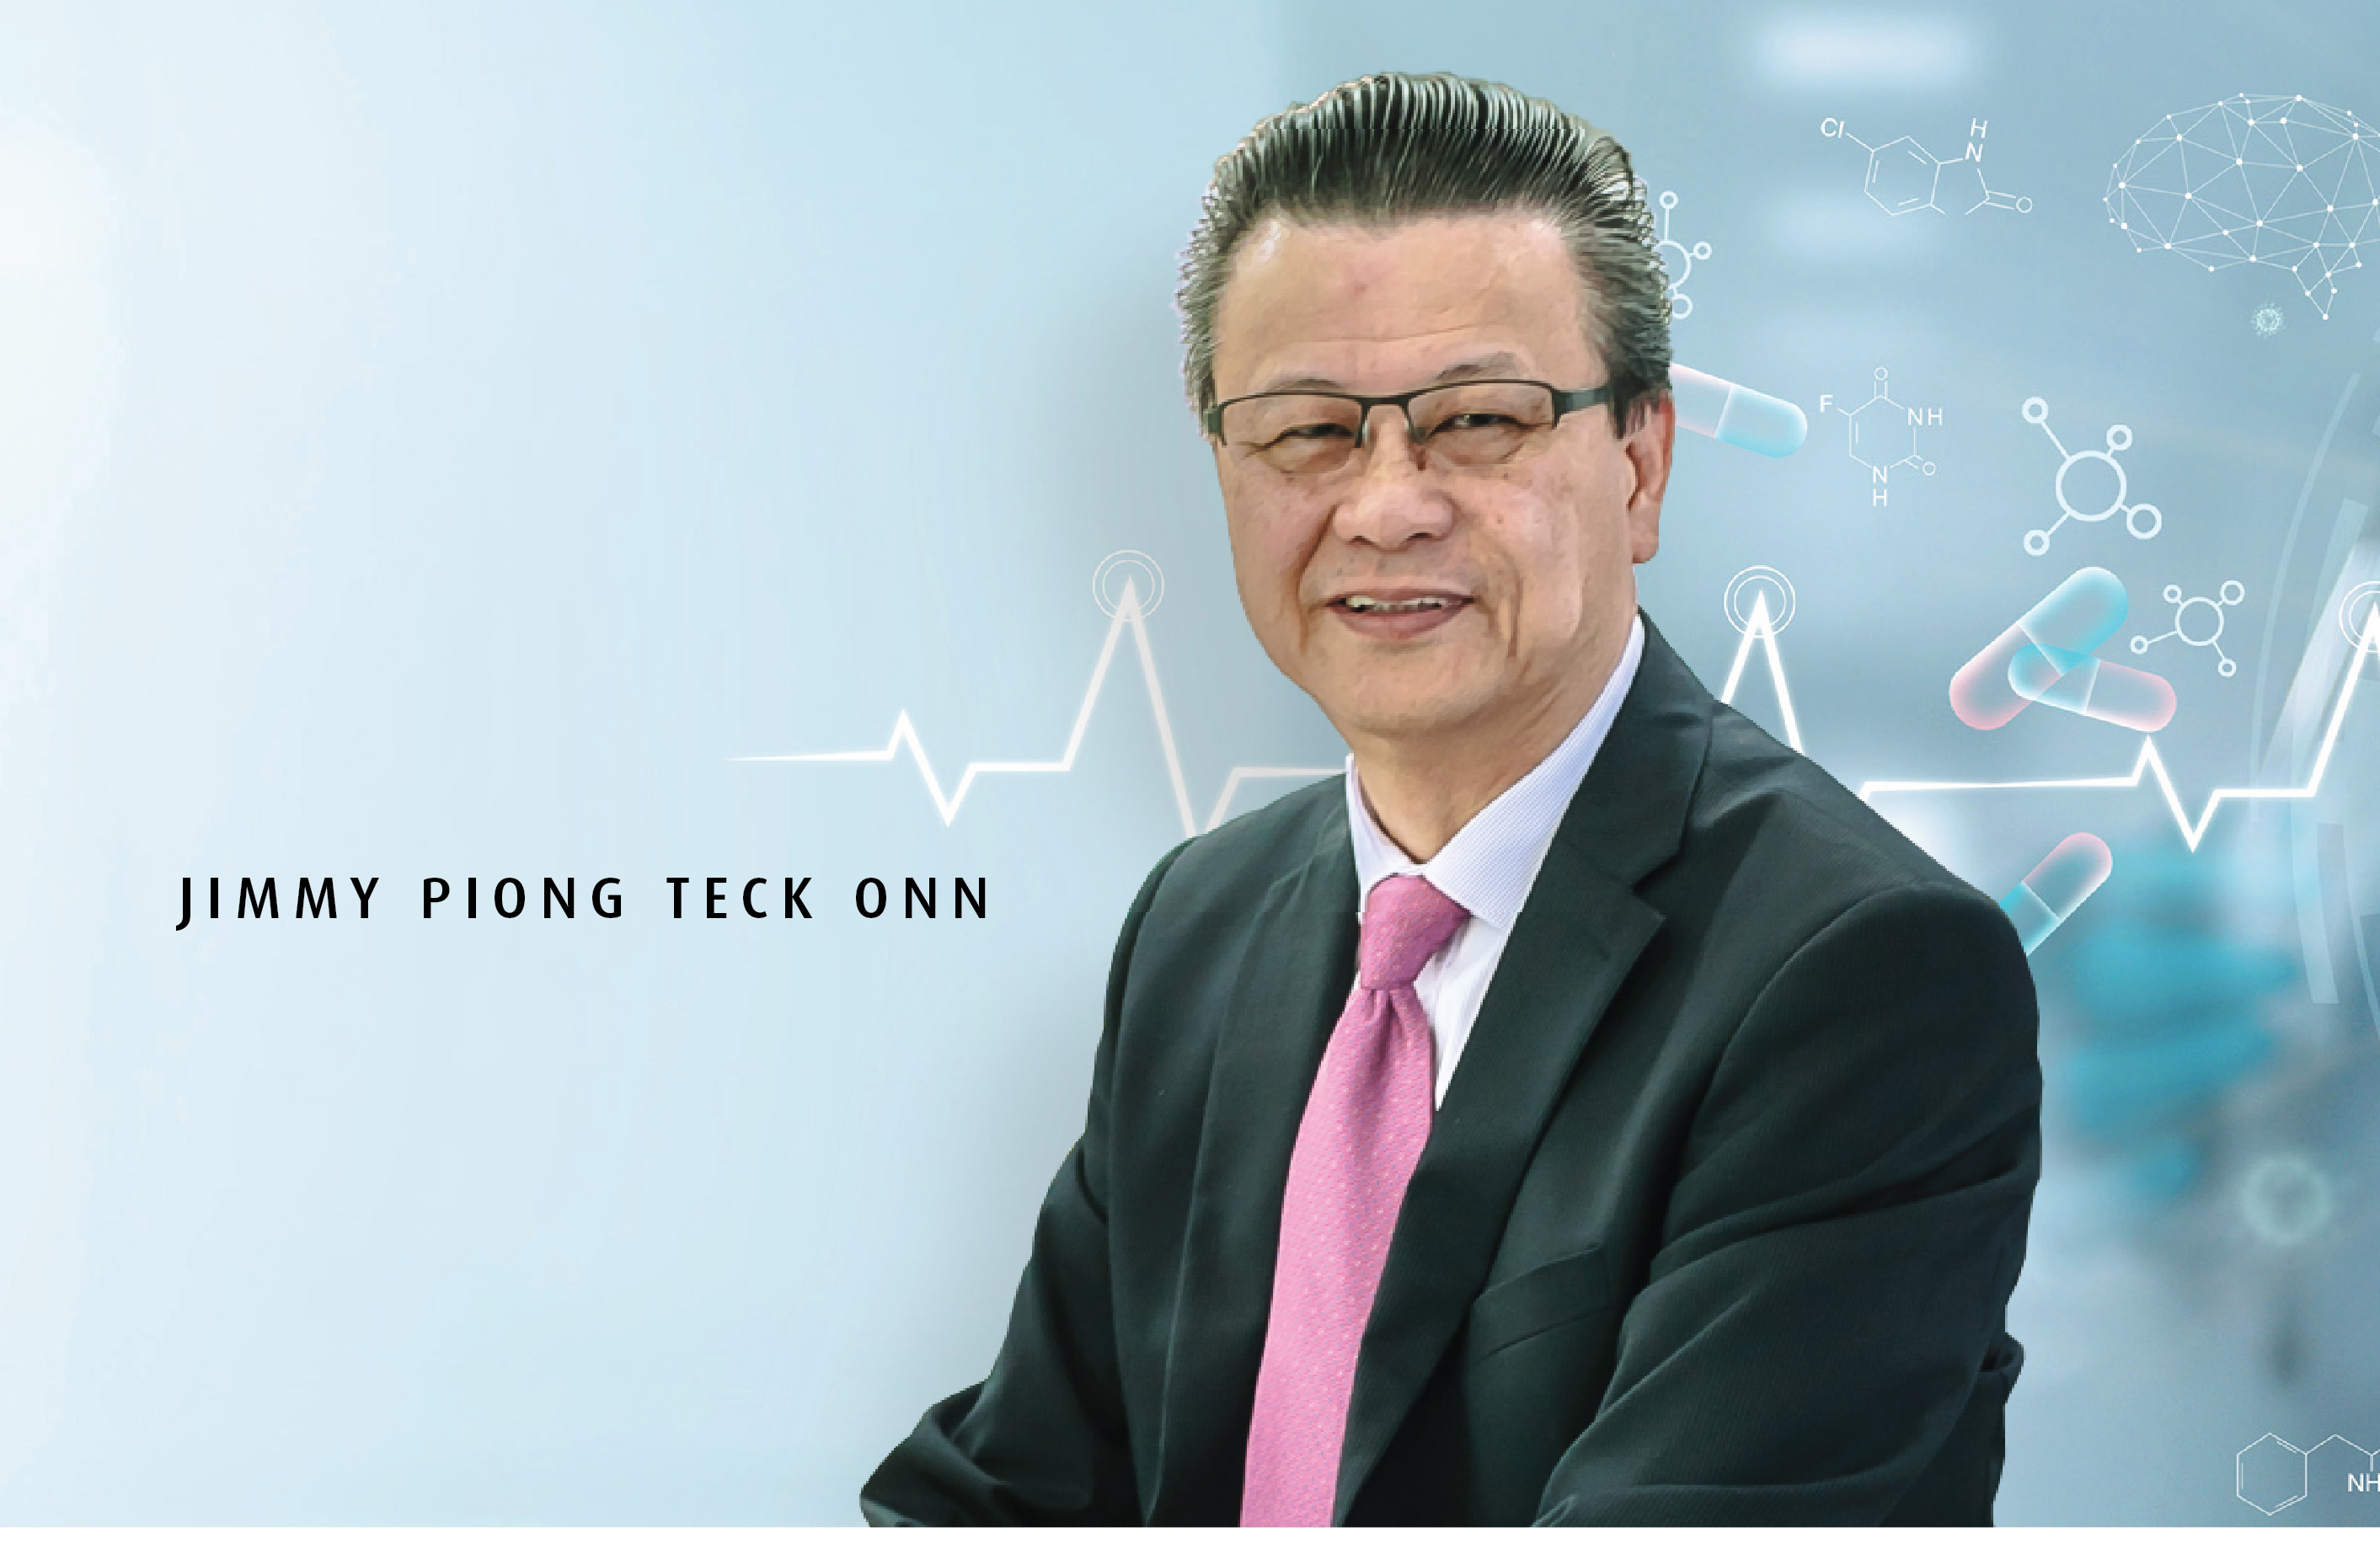 Jimmy Piong is instrumental in building Kotra Industries into a leading pharma company in Malaysia